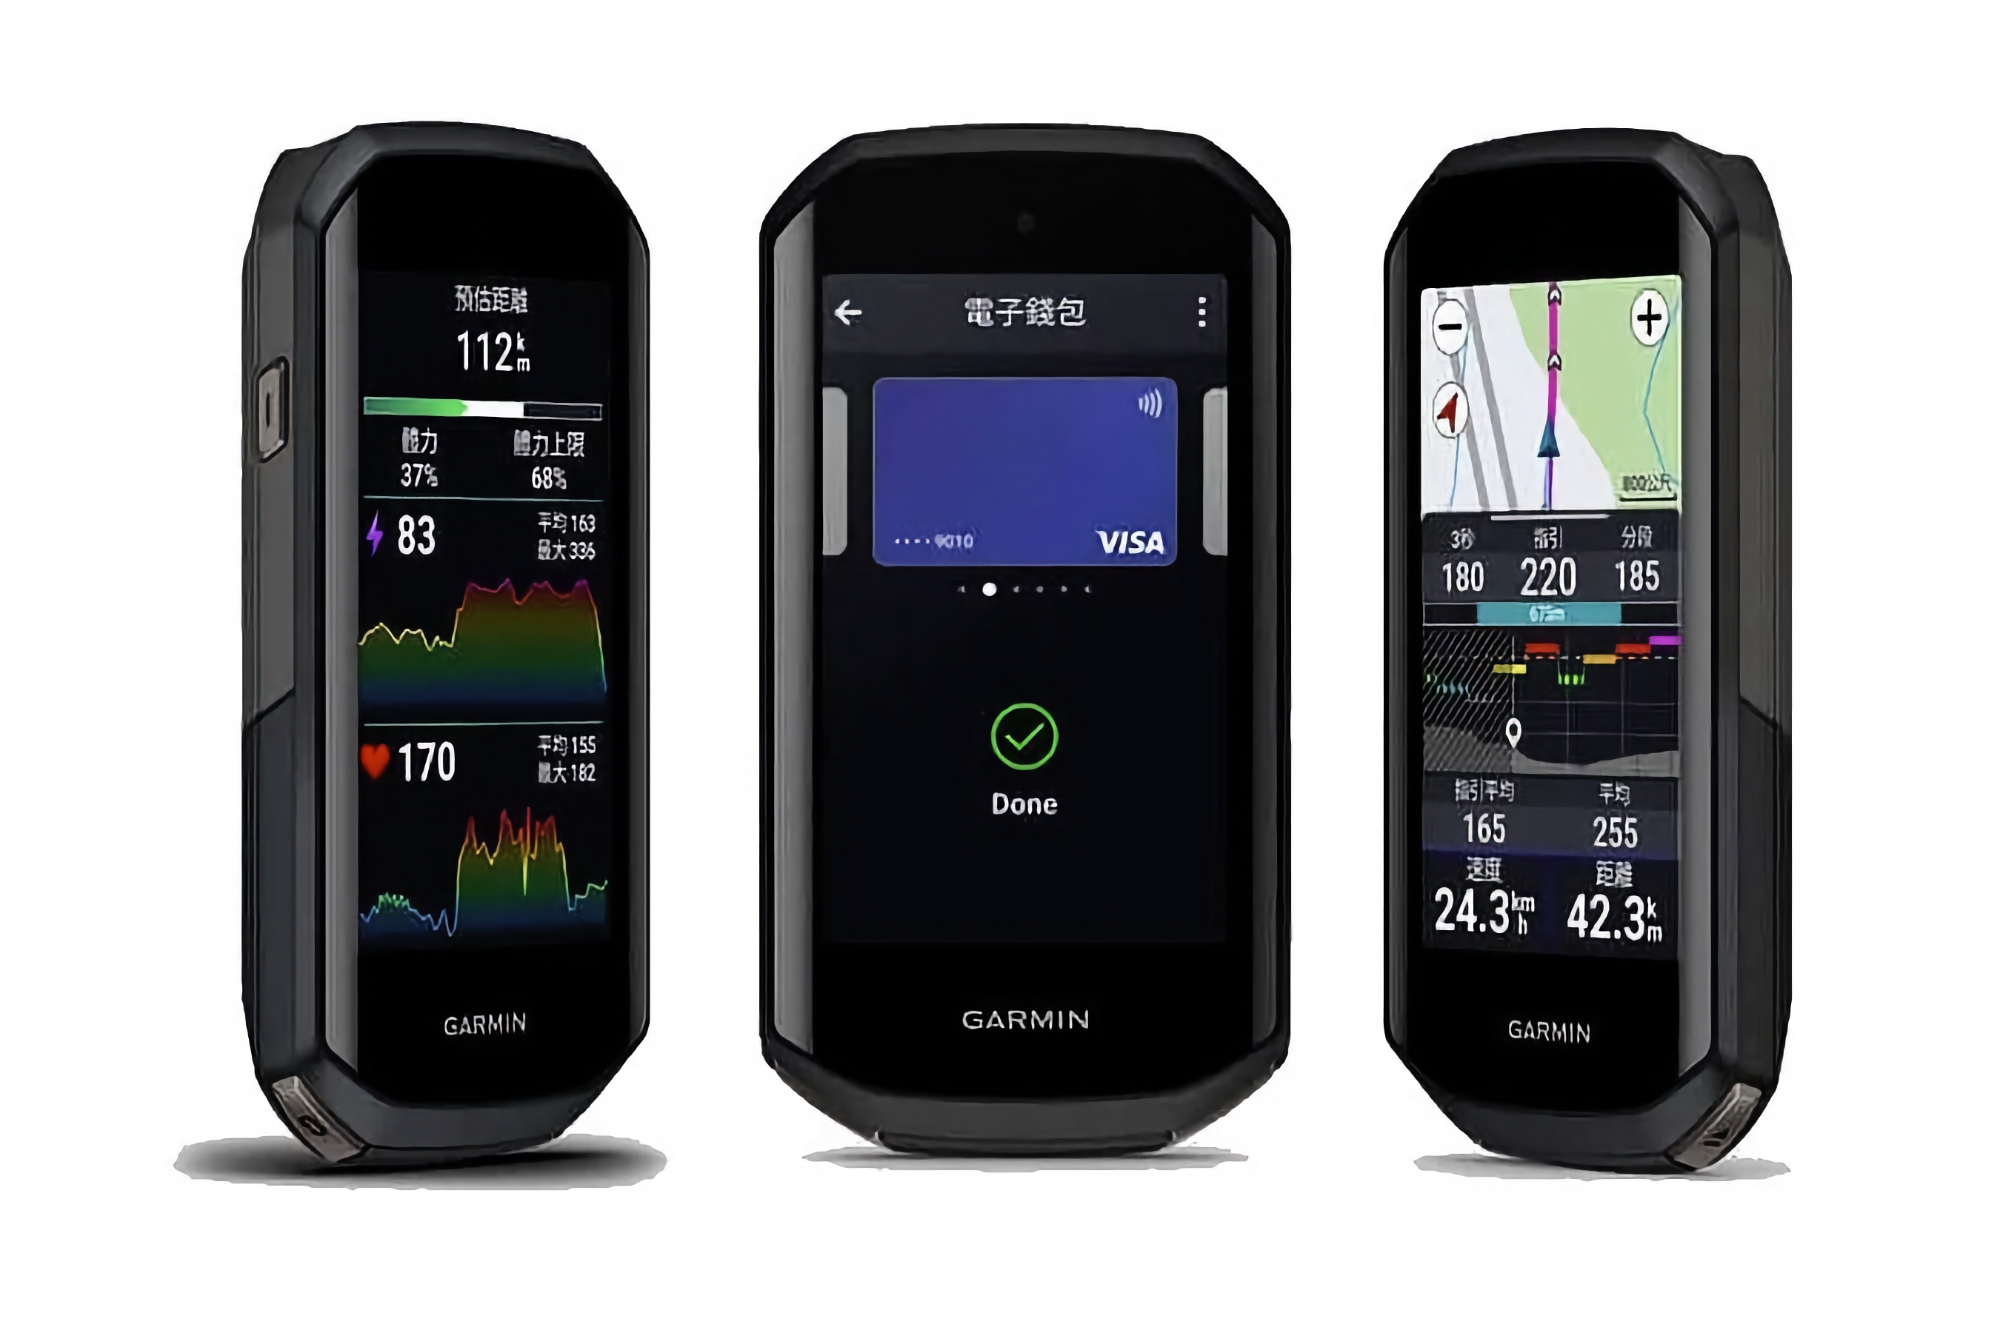 Garmin will soon release the Edge 1050 bike computer with GPS, Garmin Pay support and up to 60 hours of battery life